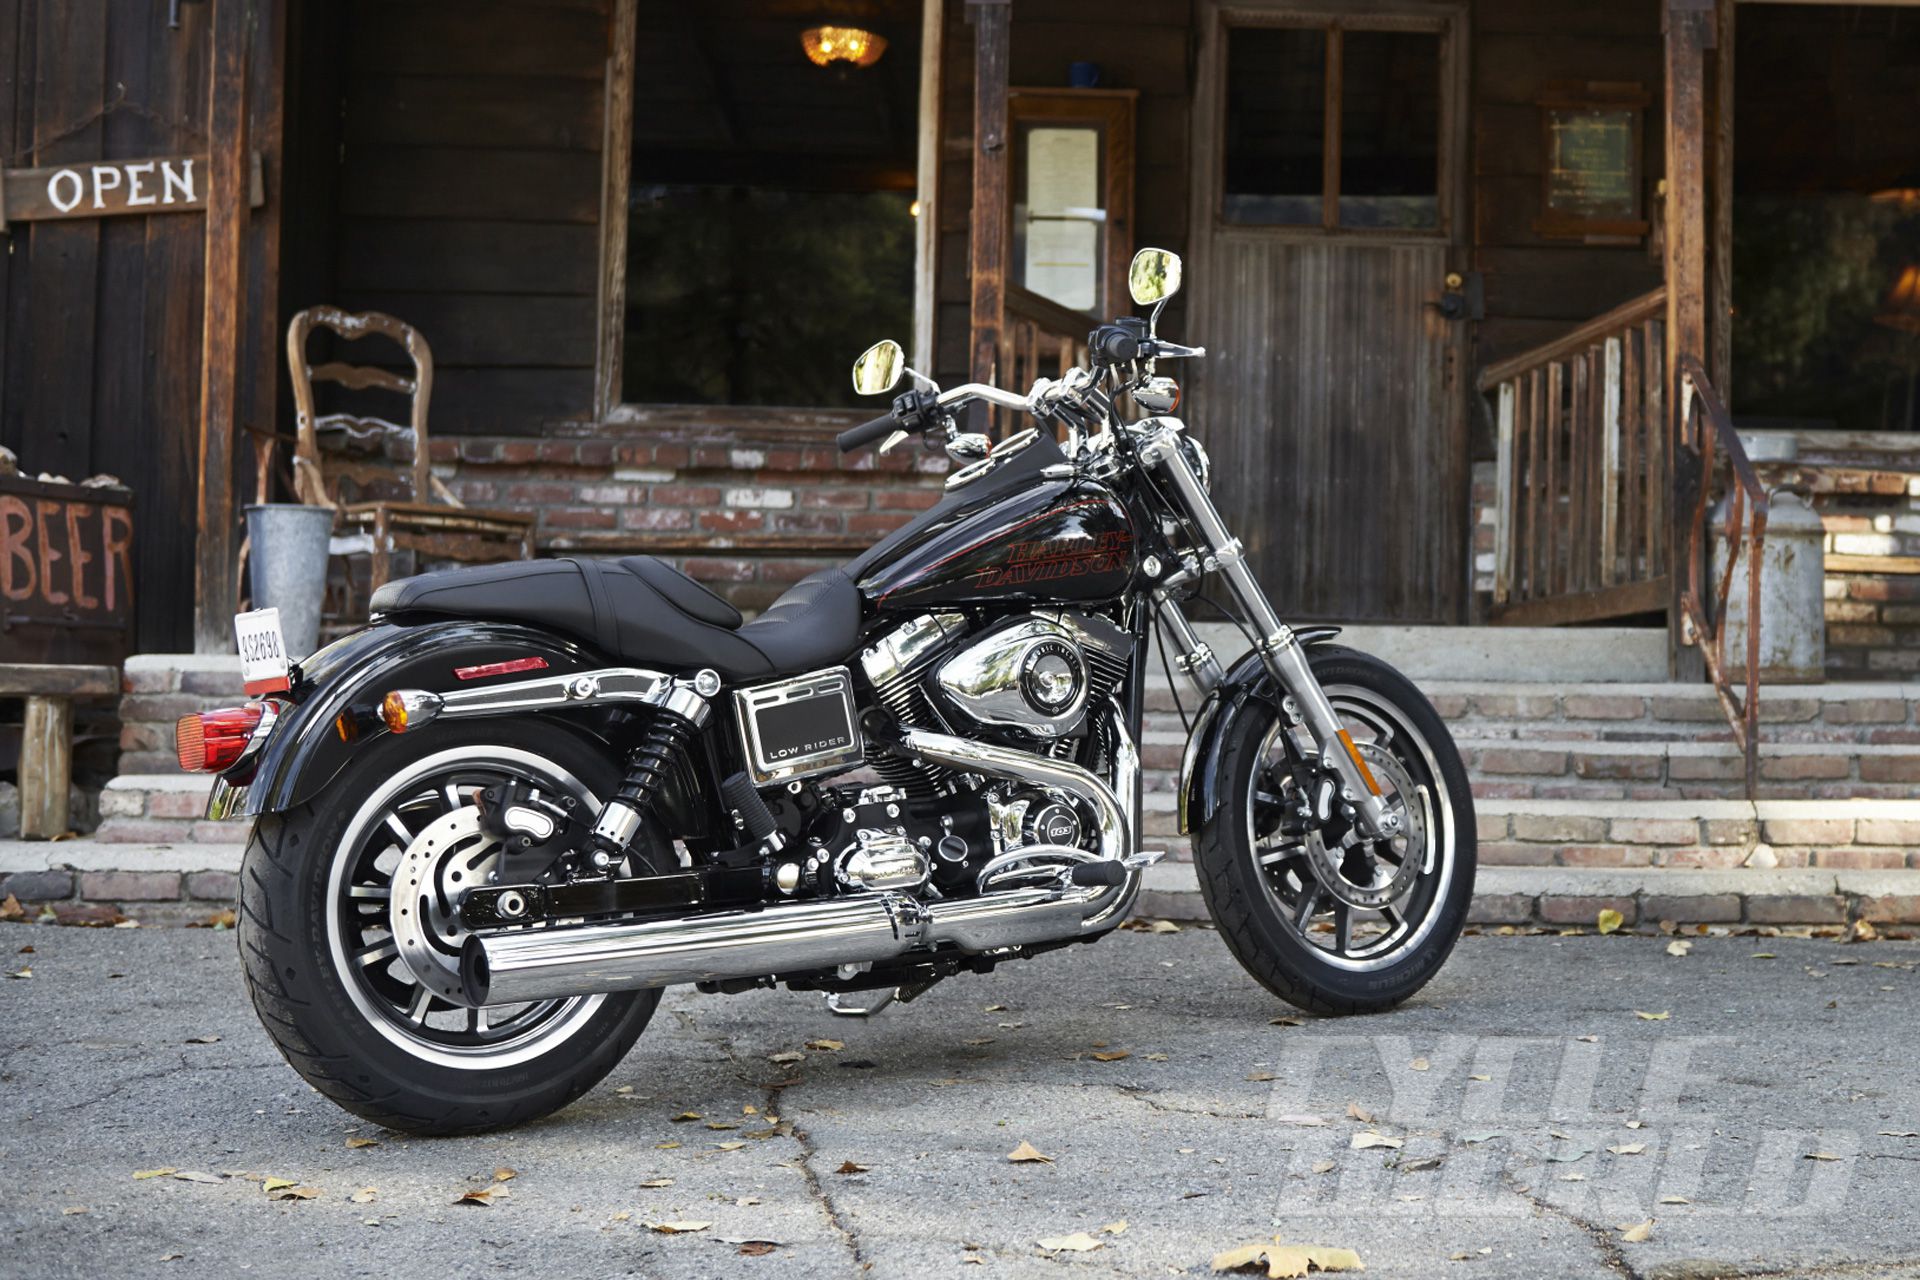 2014 Harley Davidson Low Rider First Look Review Photos Price Cycle World